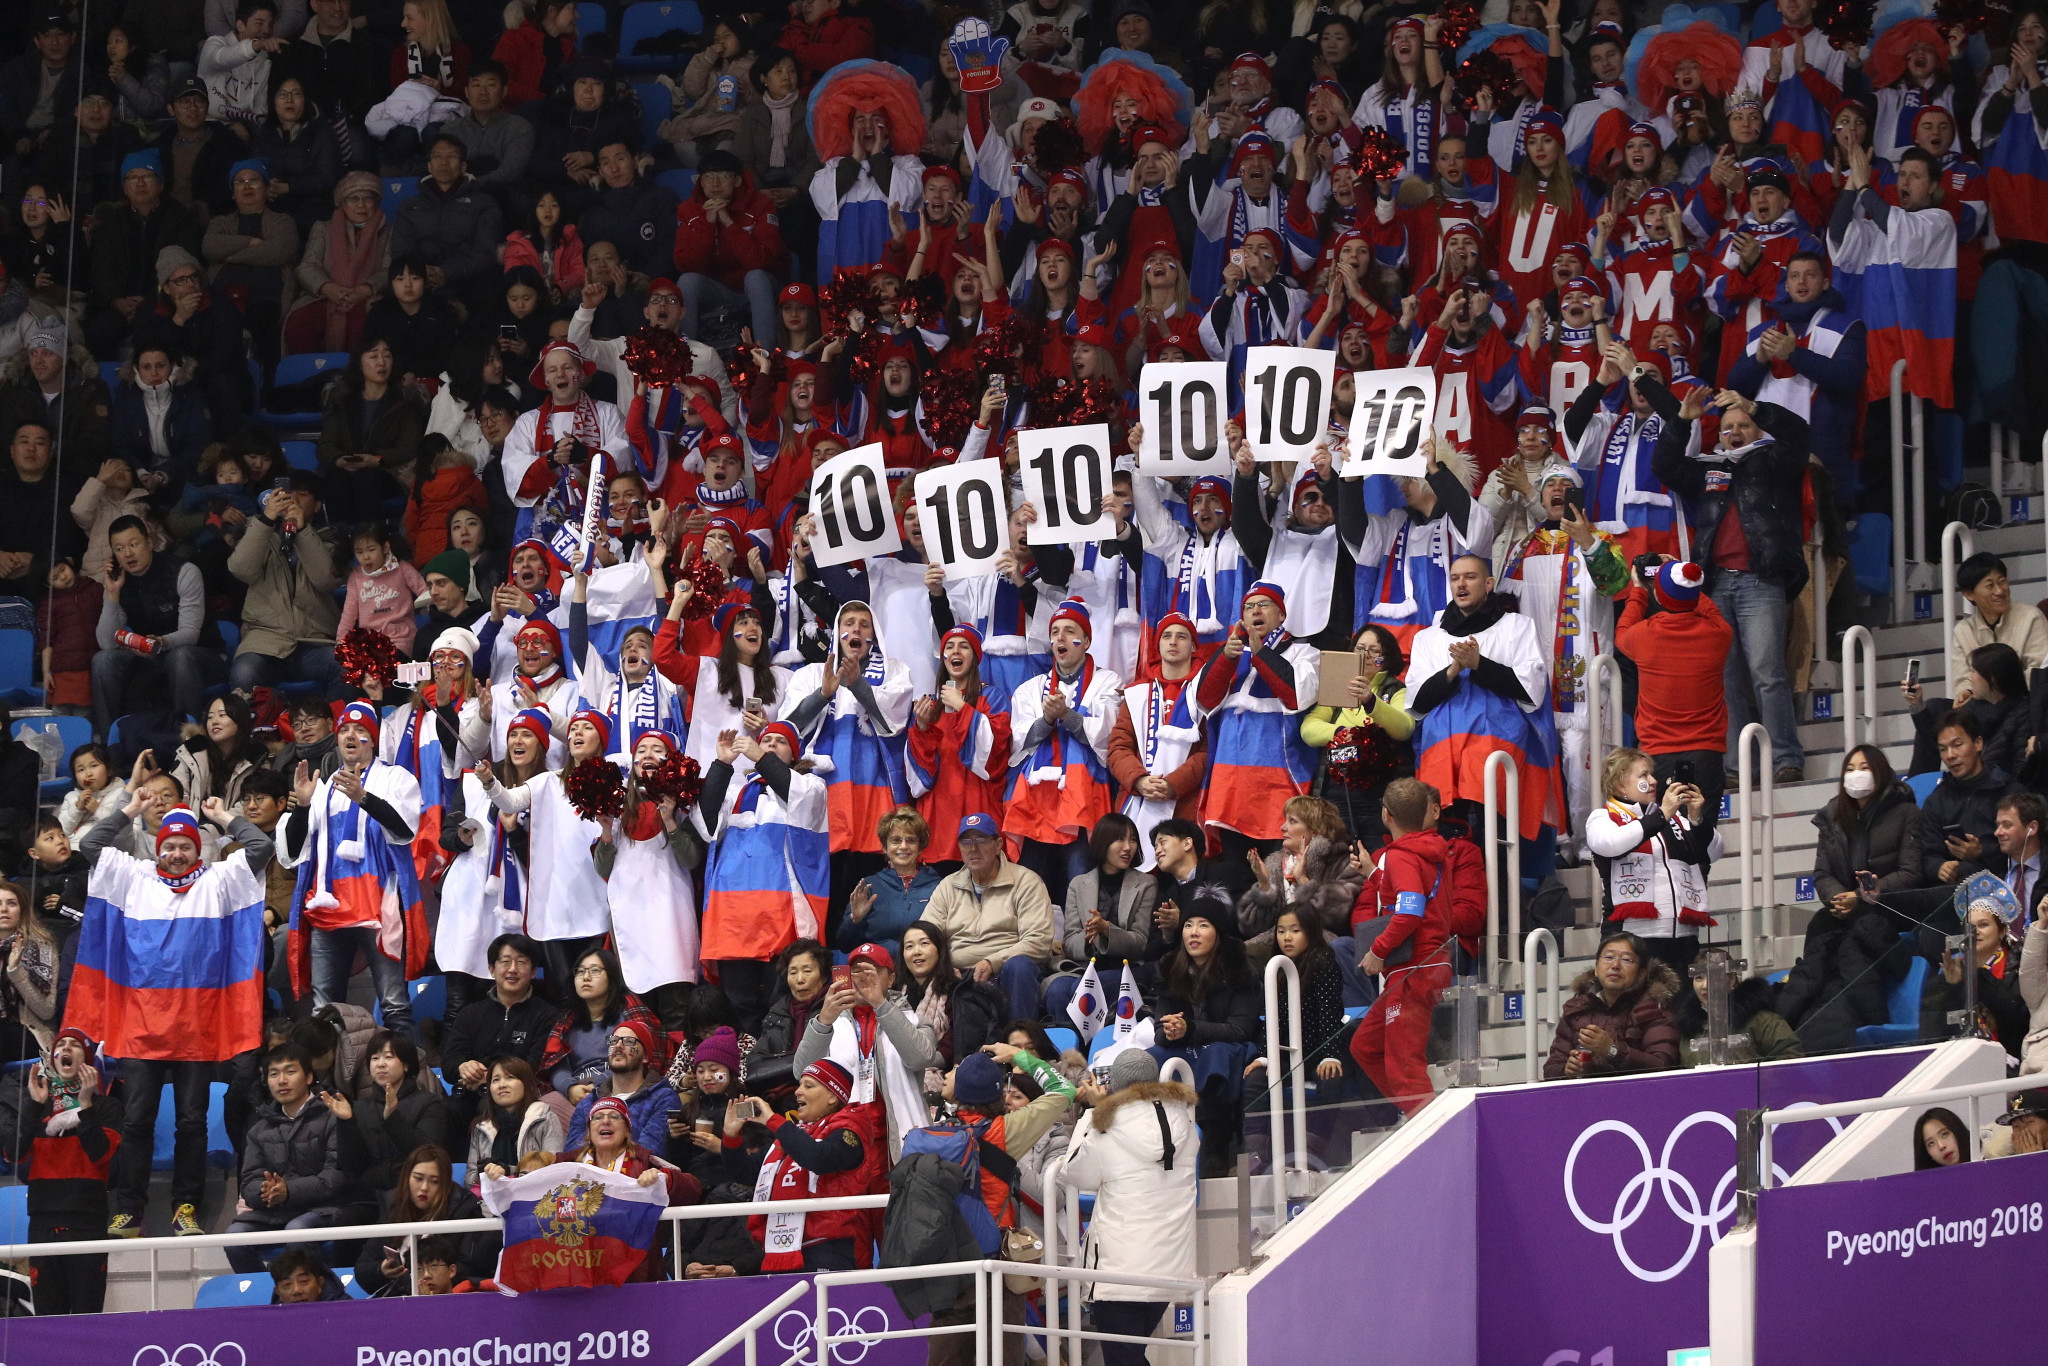 Russian supporters pictured during the figure skating competition today ©Getty Images

